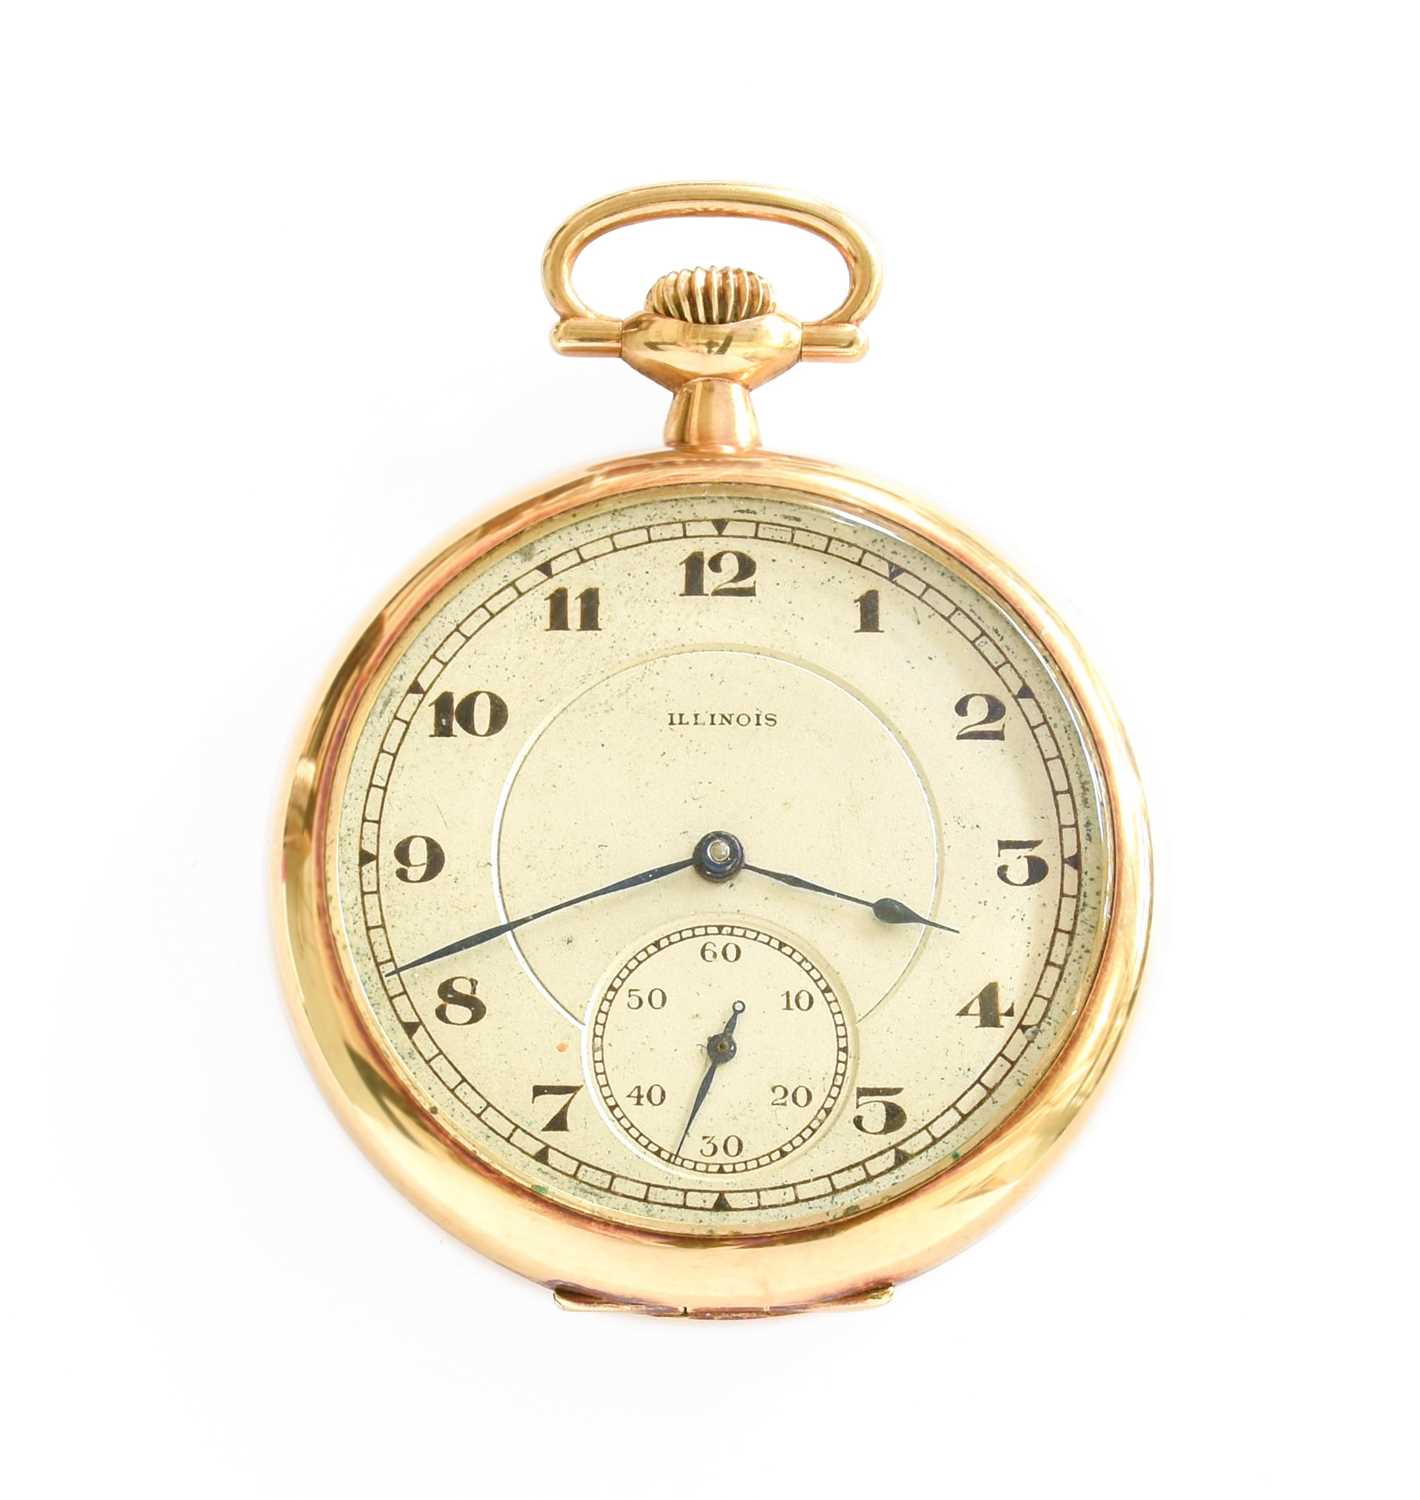 A 14 Carat Gold Open Faced Pocket Watch, signed Illinois No dust cover  Outer case diameter - 44mm